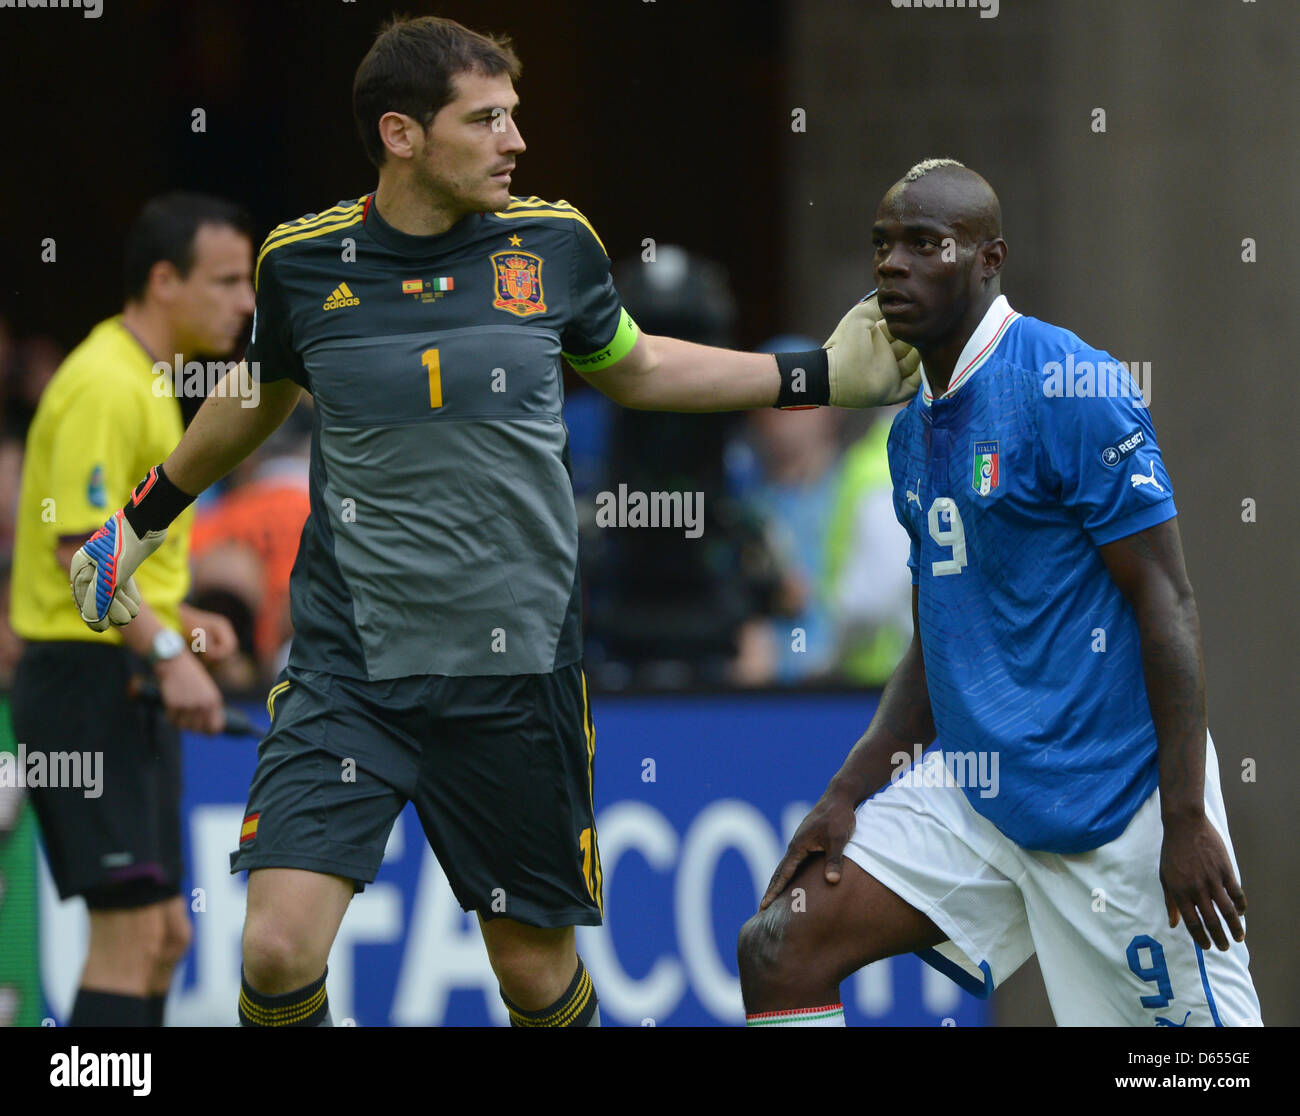 Italy's Mario Balotelli (R) and Spain's Iker Casillas (L) during UEFA EURO 2012 group C soccer match Spain vs Italy at Arena Gdansk in Gdansk, Poland, 10 June 2012. Photo: Marcus Brandt dpa (Please refer to chapters 7 and 8 of http://dpaq.de/Ziovh for UEFA Euro 2012 Terms & Conditions) Stock Photo